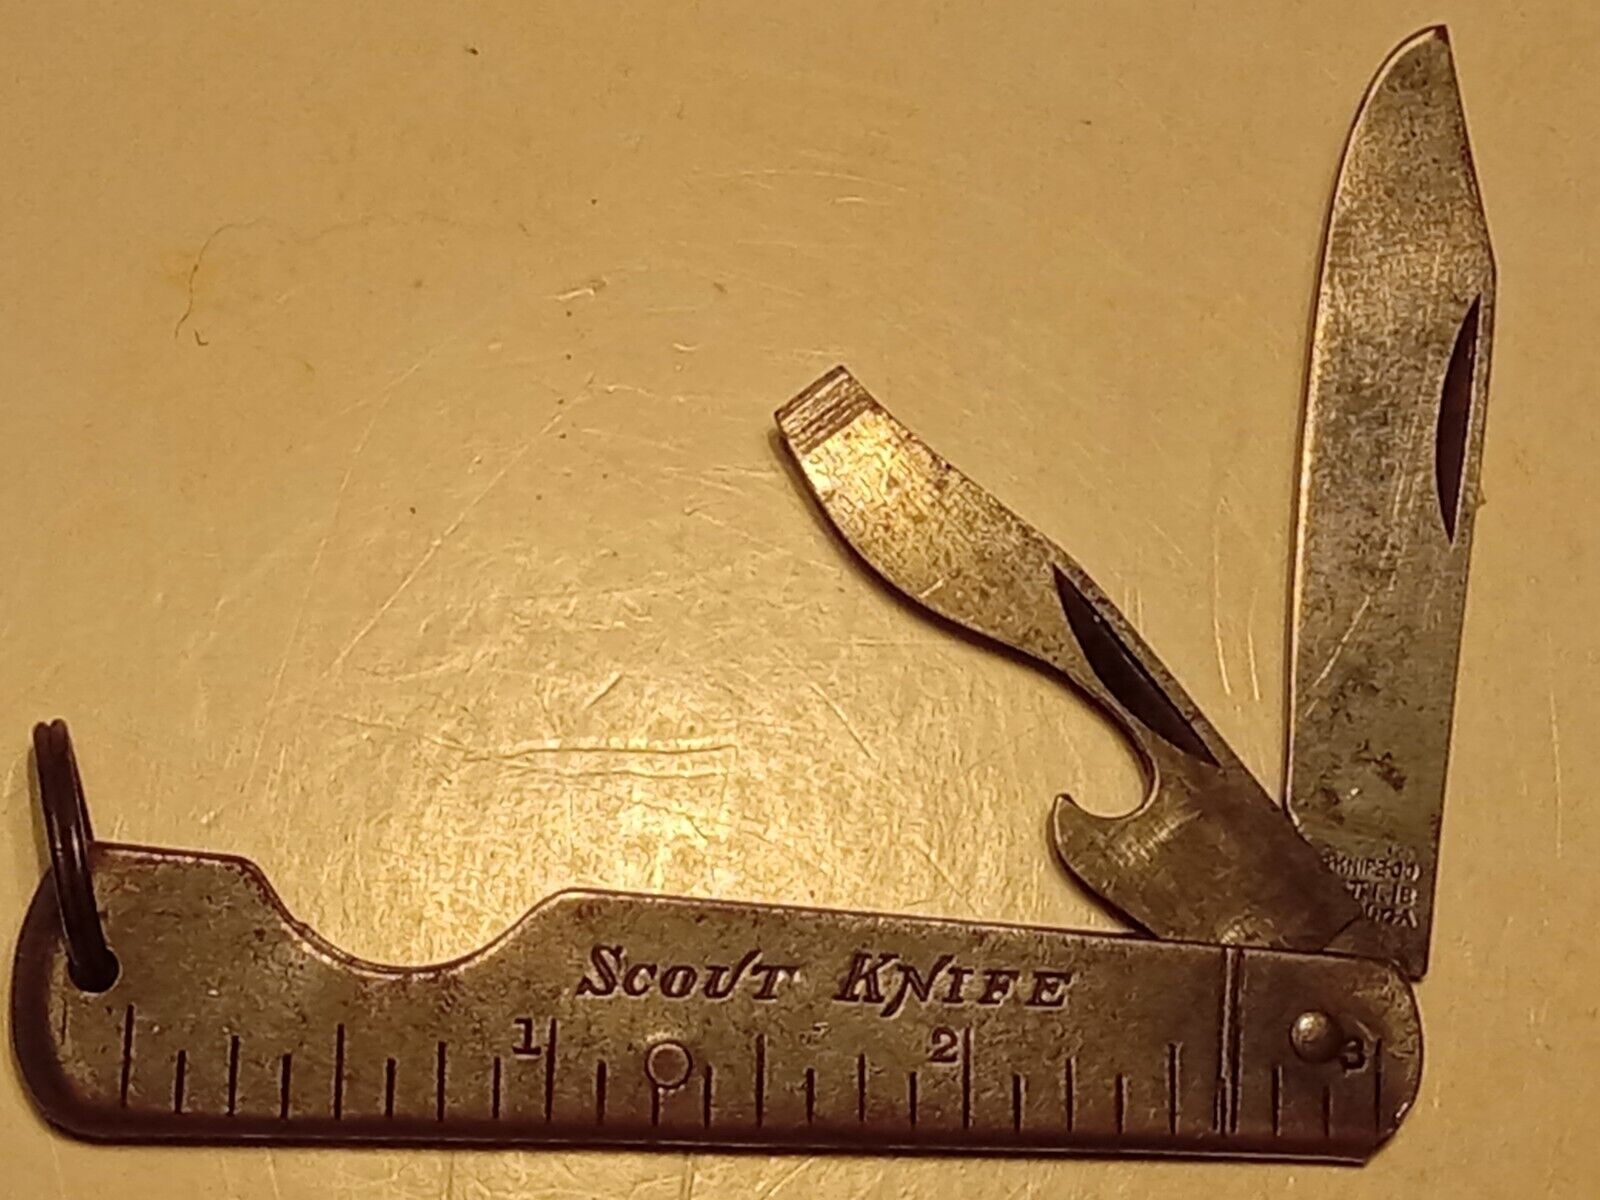 Eagle Knife Co. Made in USA.Patented Oct. 1, 1918. Scout Knife